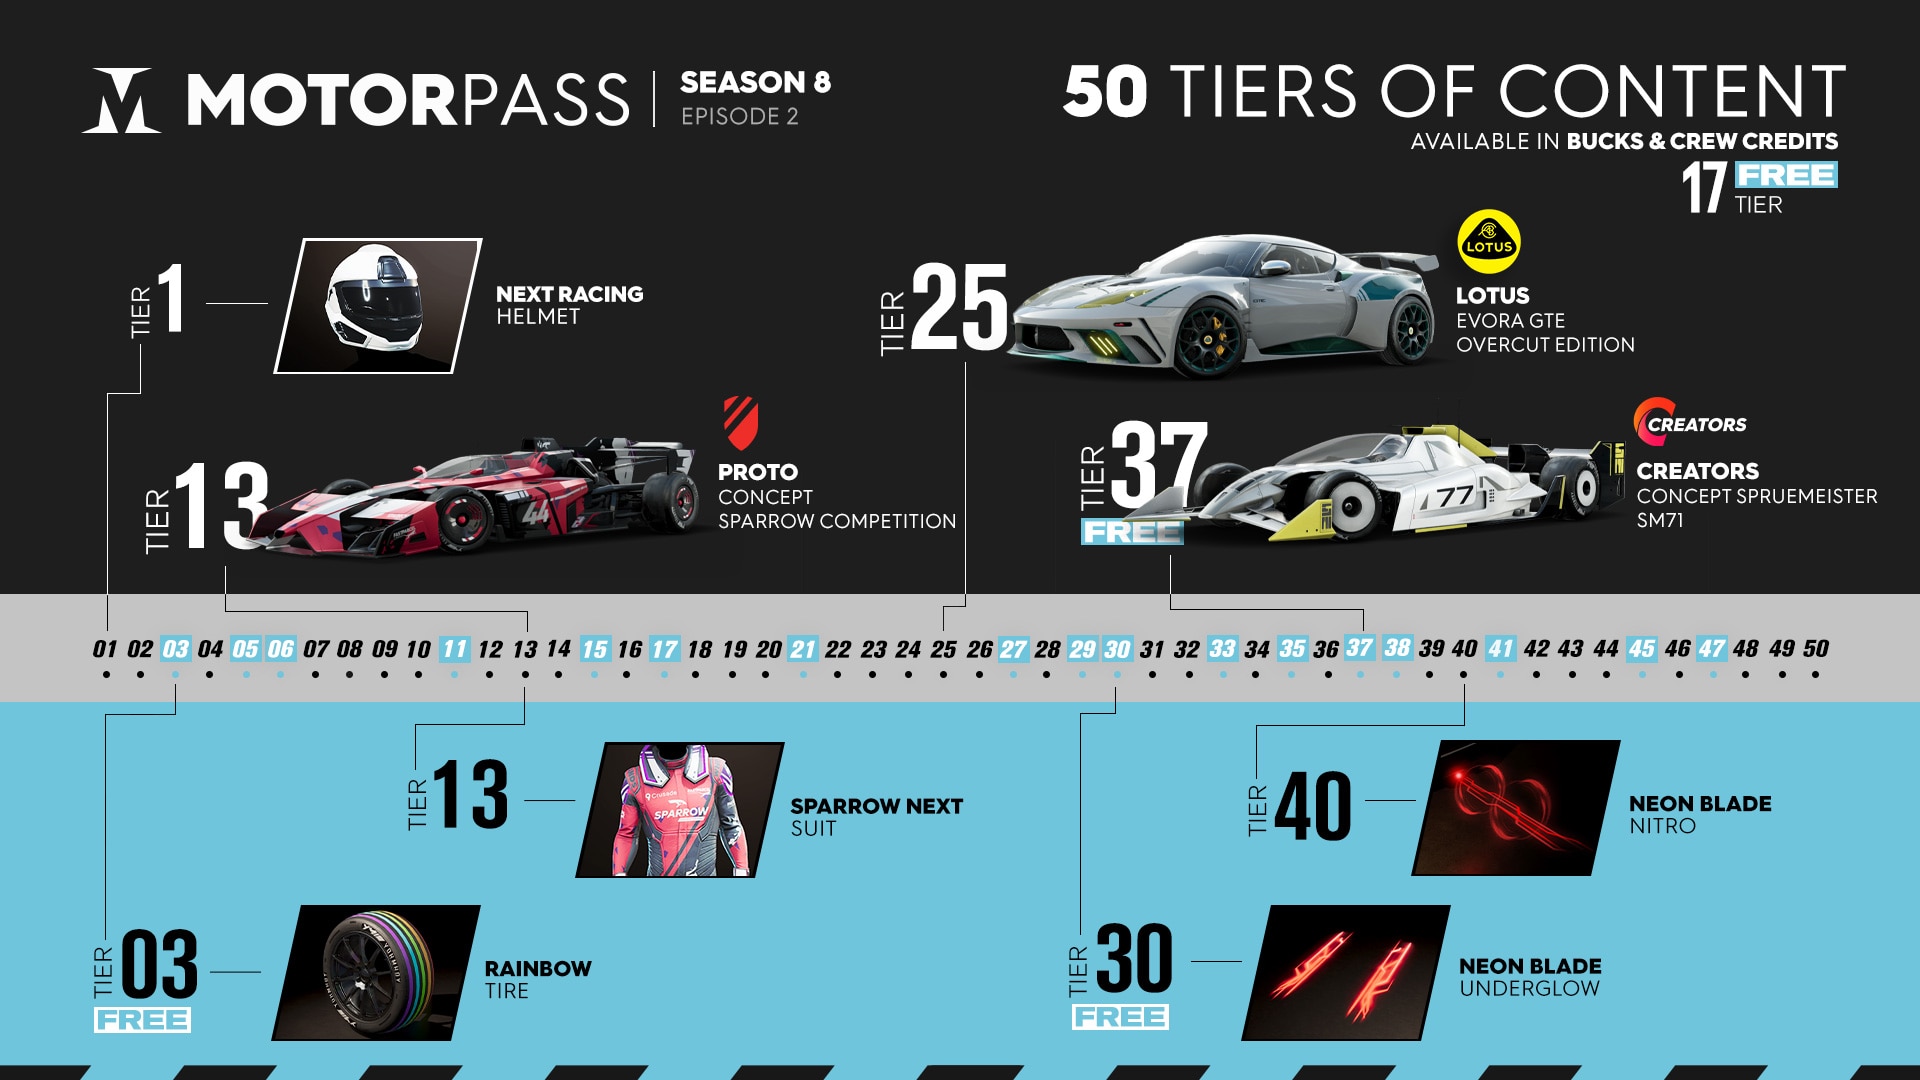 [TC2] News Article - S8E2 Content Overview - Motorpass Infographic